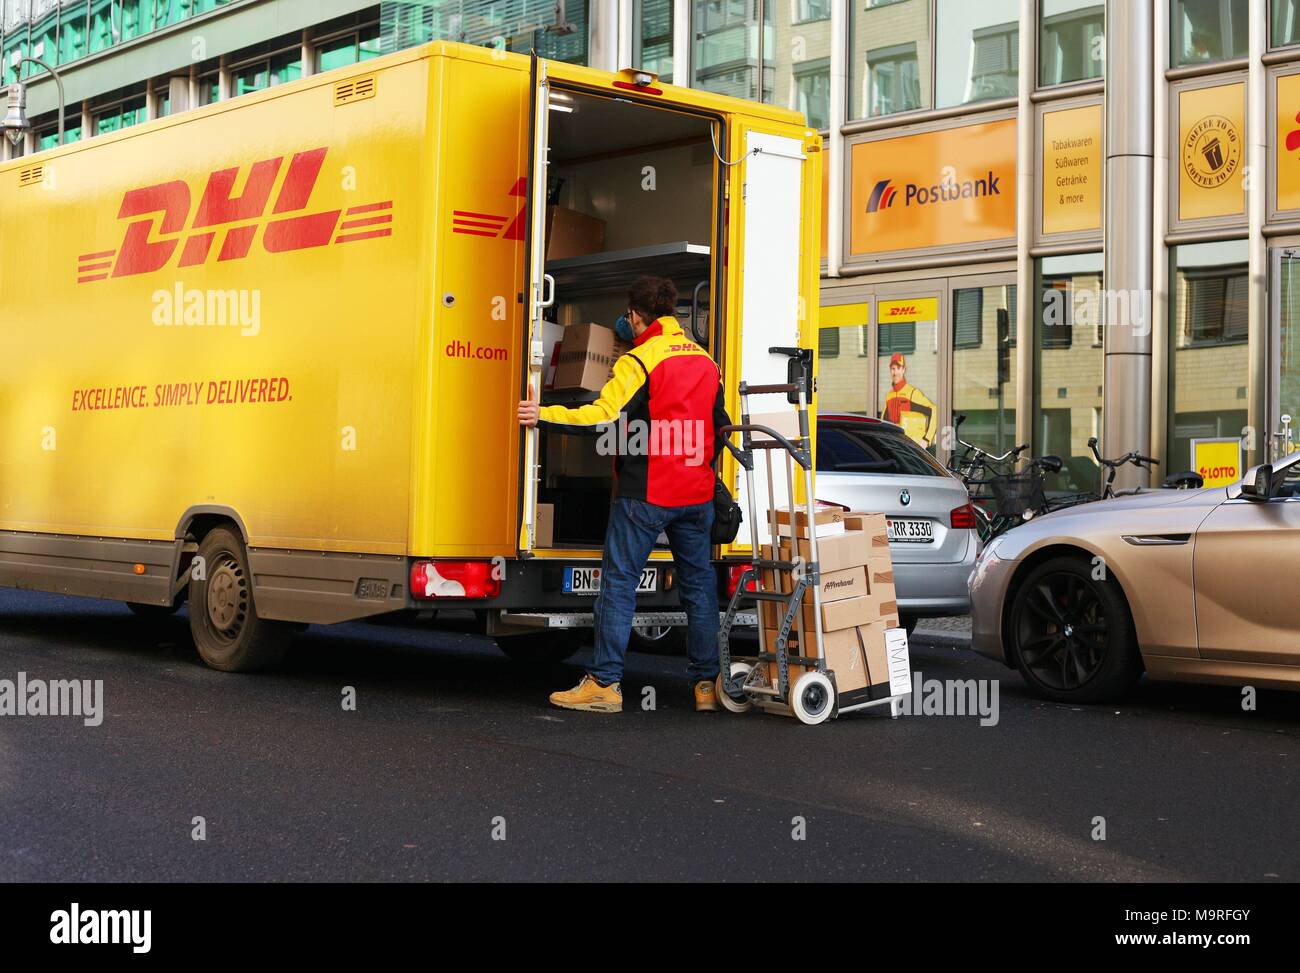 Page 3 - Yellow Dhl Car High Resolution Stock Photography and Images - Alamy